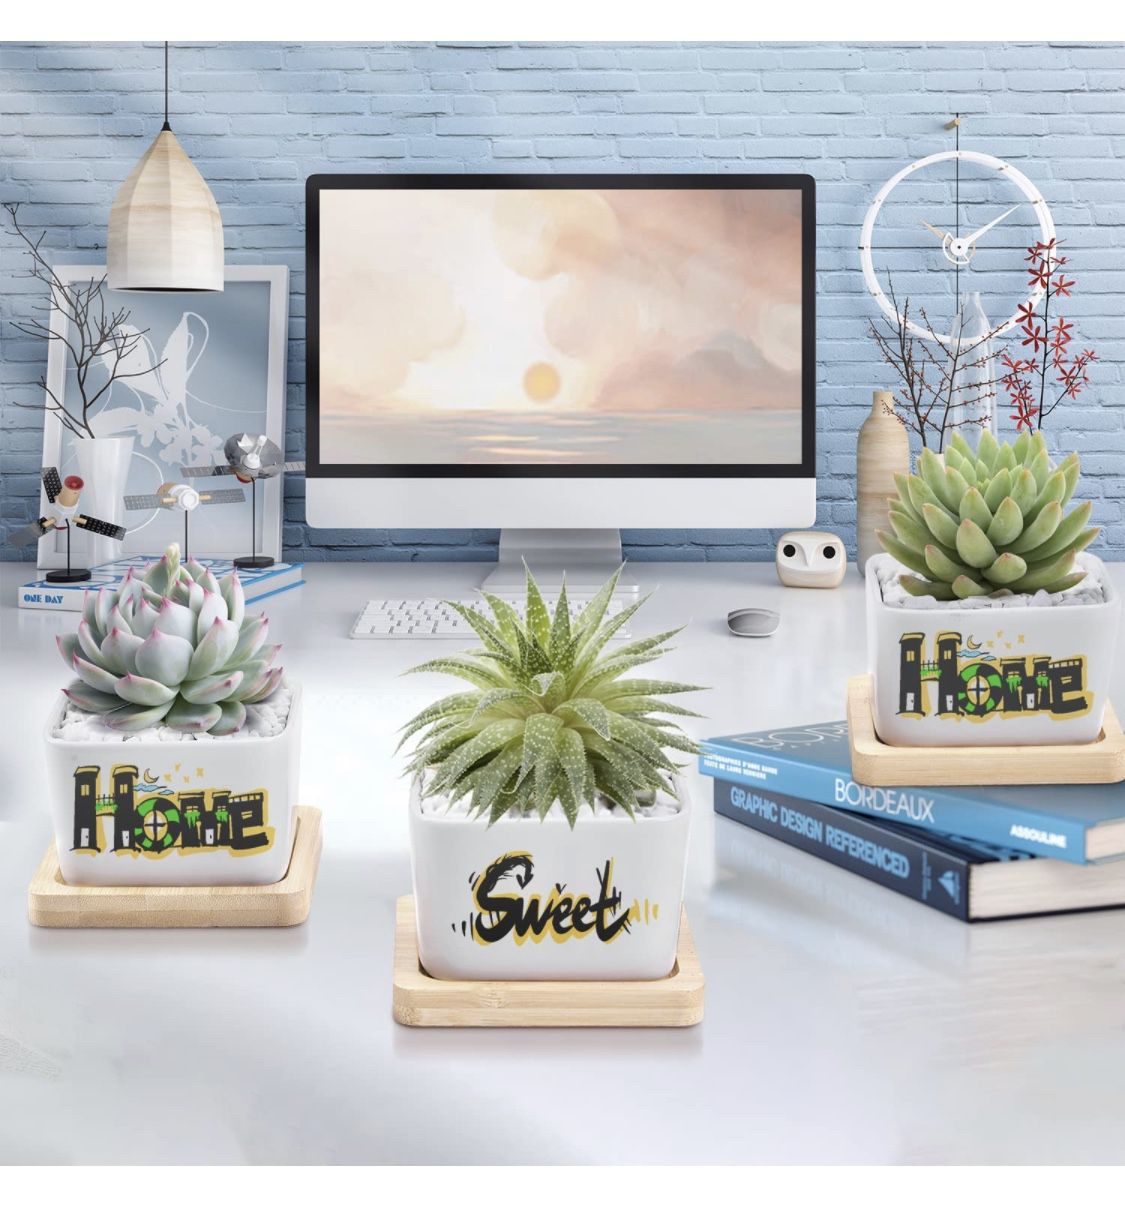 New Home Housewarming Gift, Home Owner Couple Gift Ideas, Personalized Home Sweet Home Succulent Pots Present for First Home Buyer,  for New Home